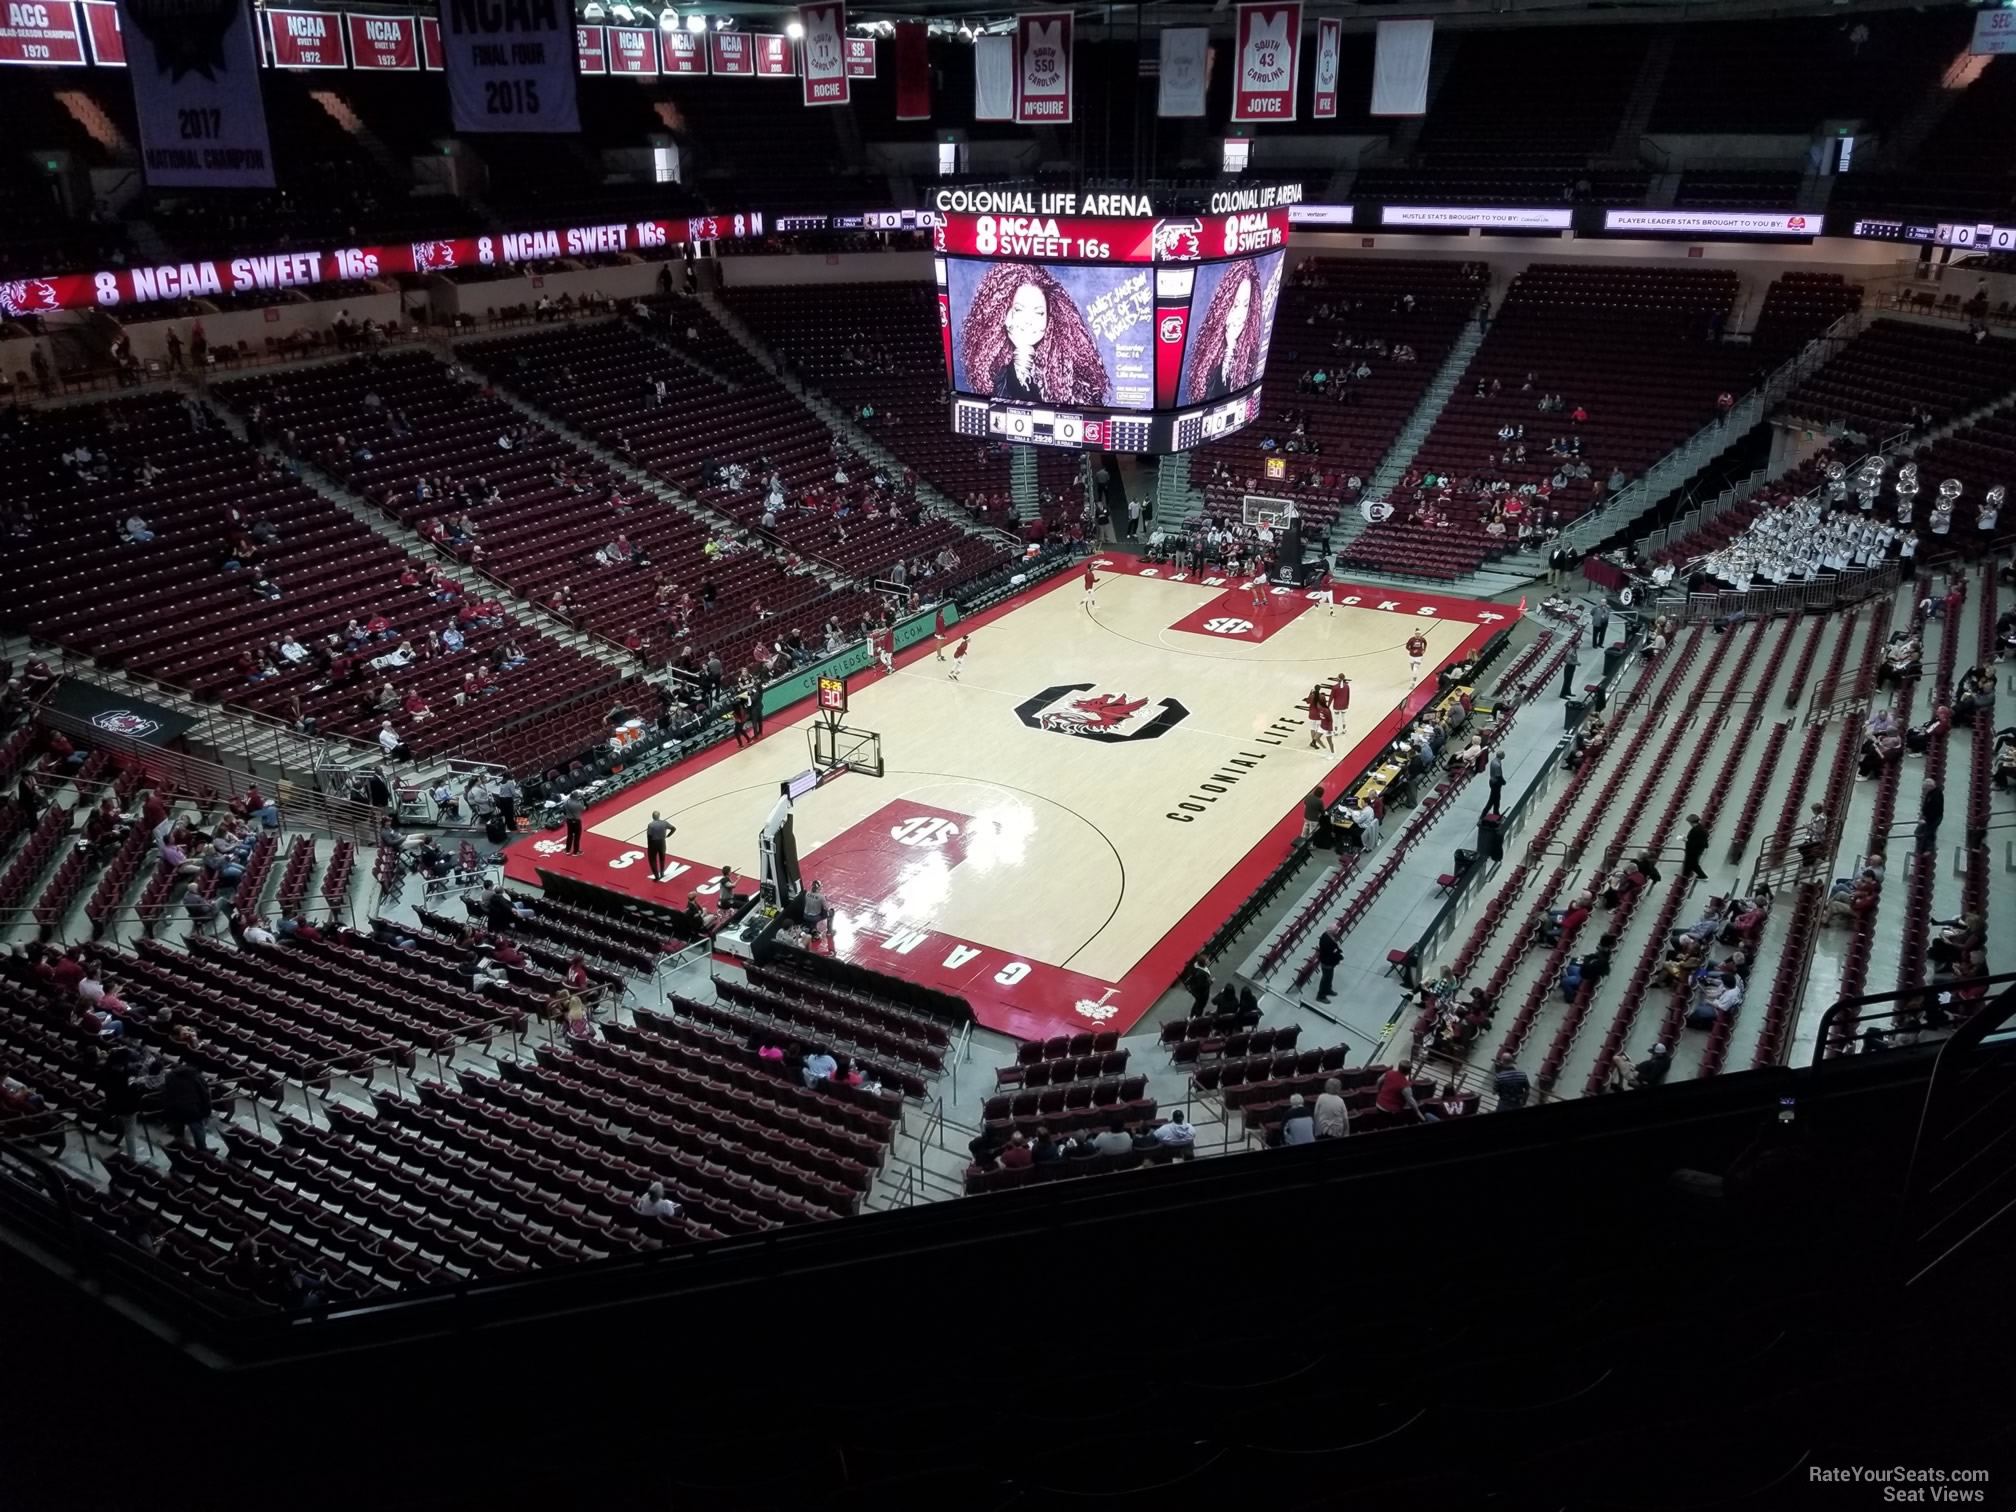 section 227, row 7 seat view  for basketball - colonial life arena